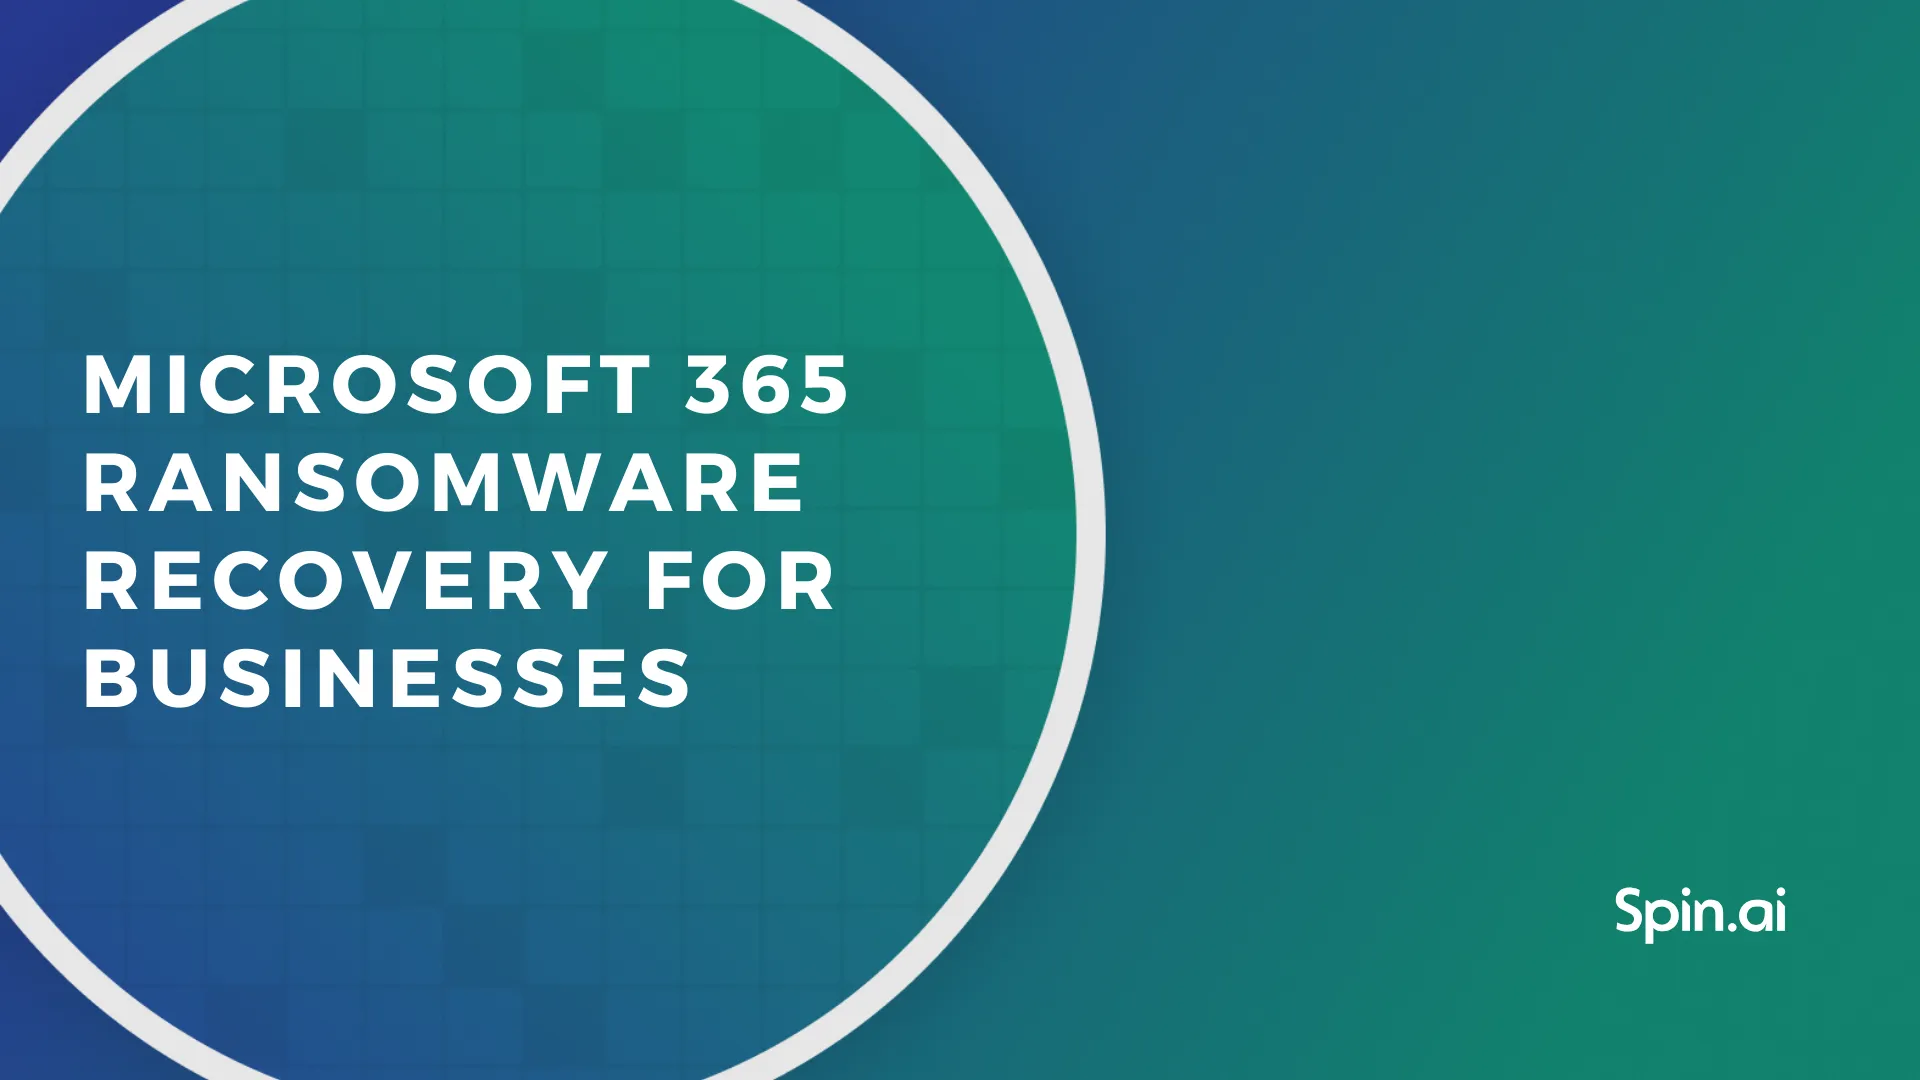 Microsoft 365 Ransomware Recovery for Businesses